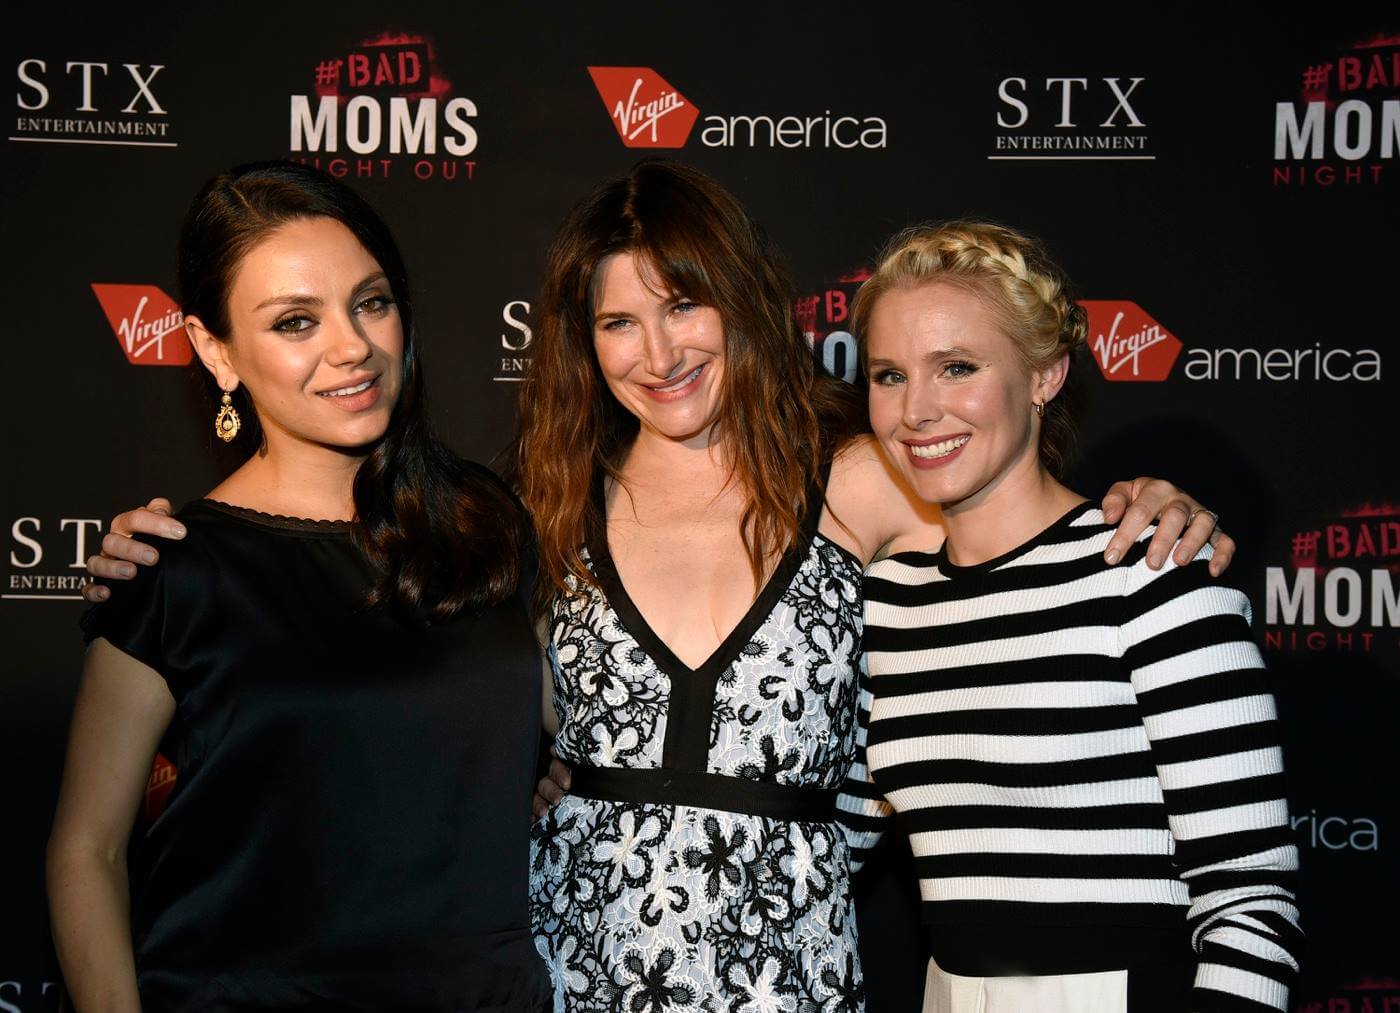 Step and repeat backdrop for Virgin America's BAD MOMS night out event